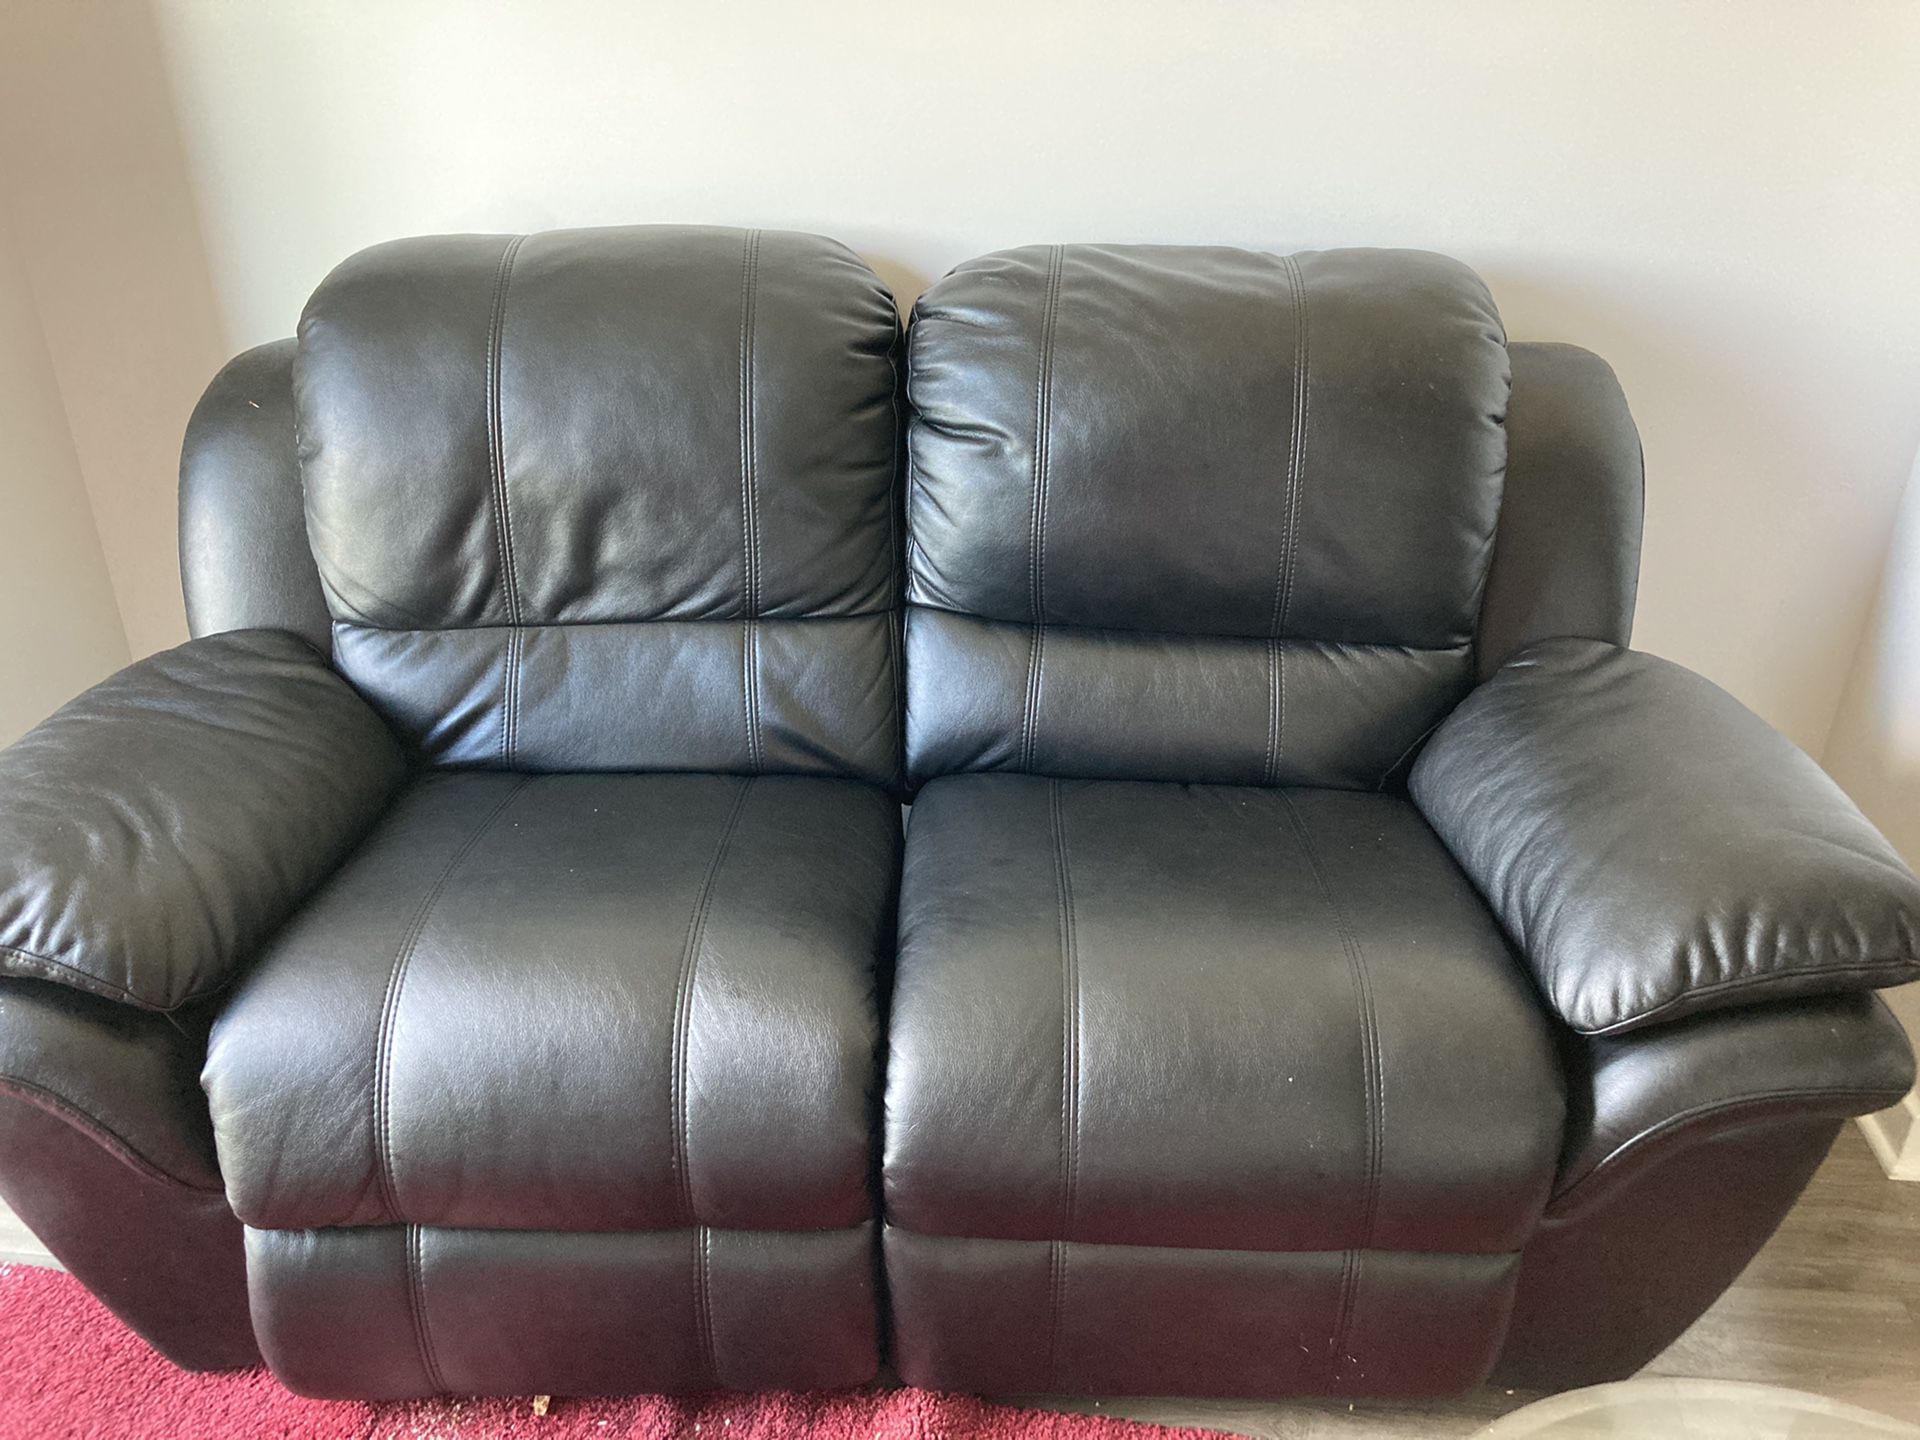 black leather couches (New)